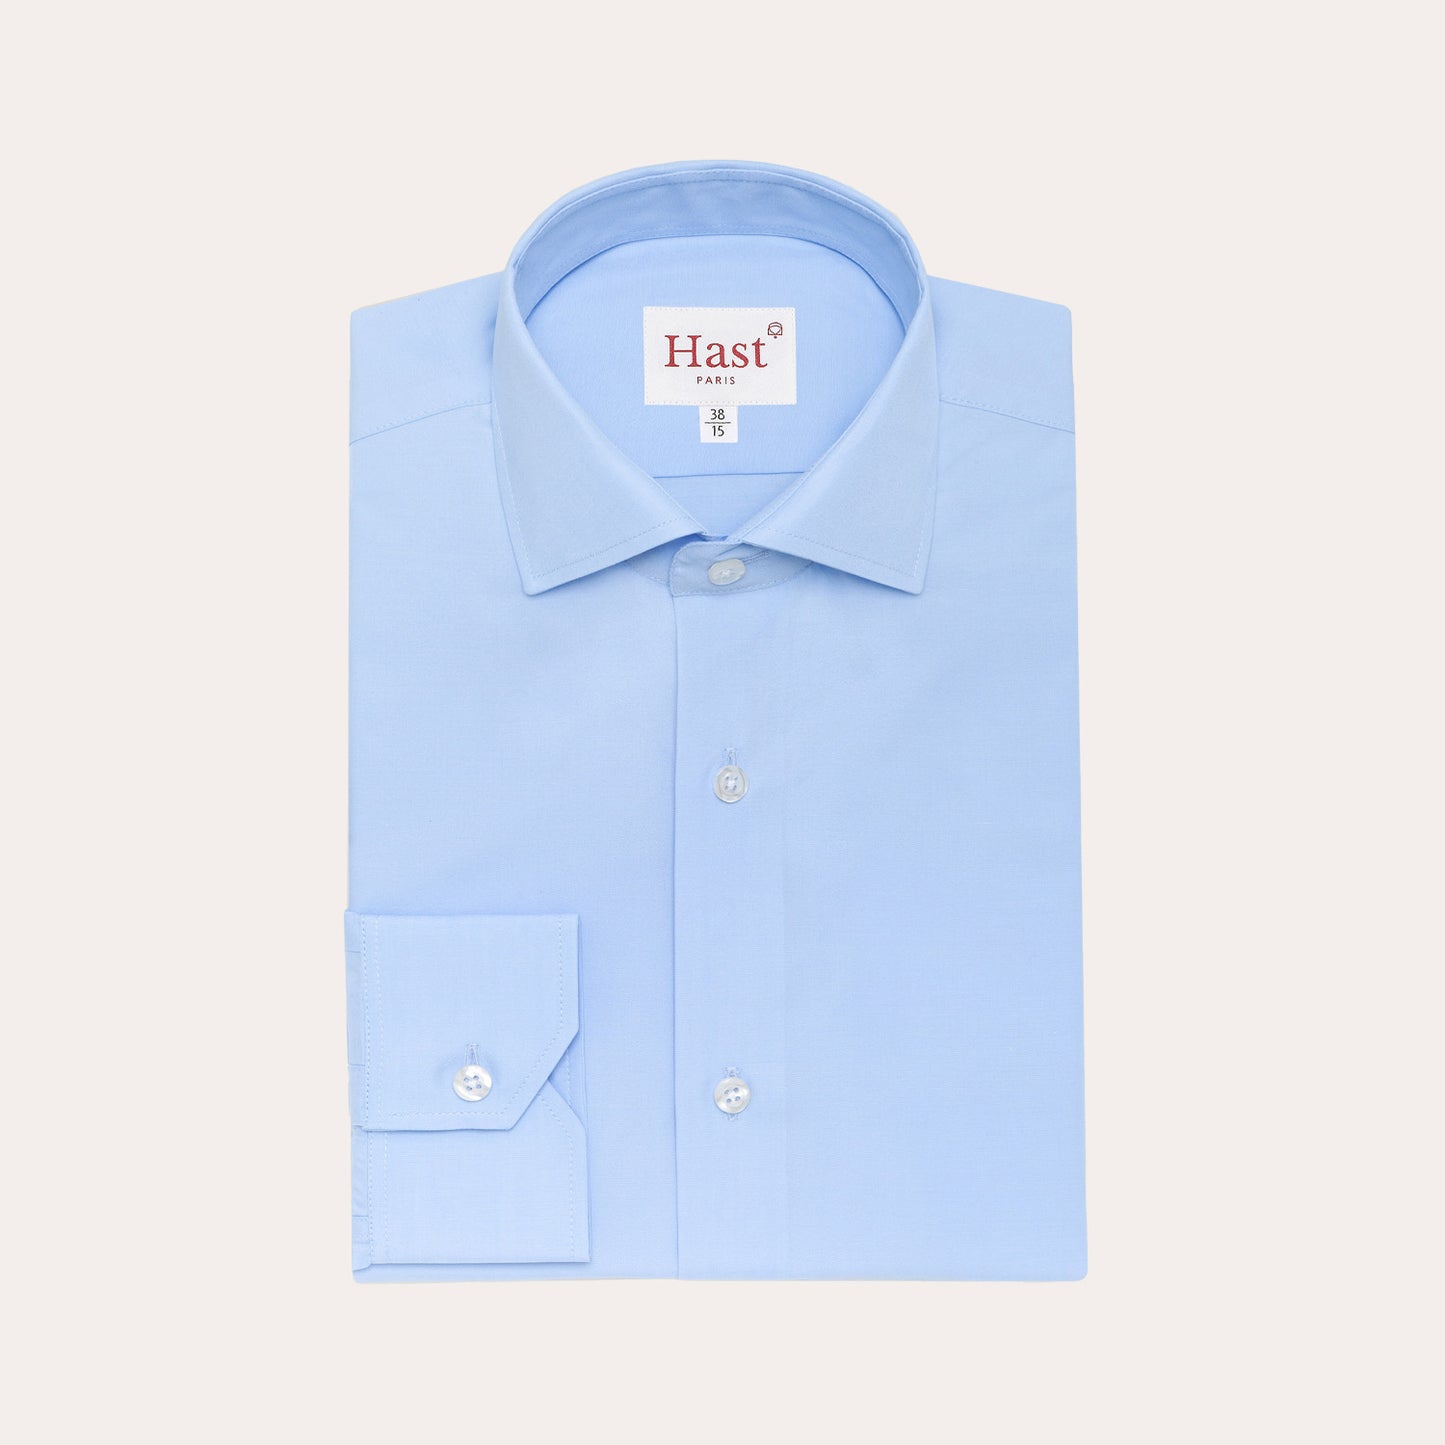 Fitted shirt in blue double-twisted poplin